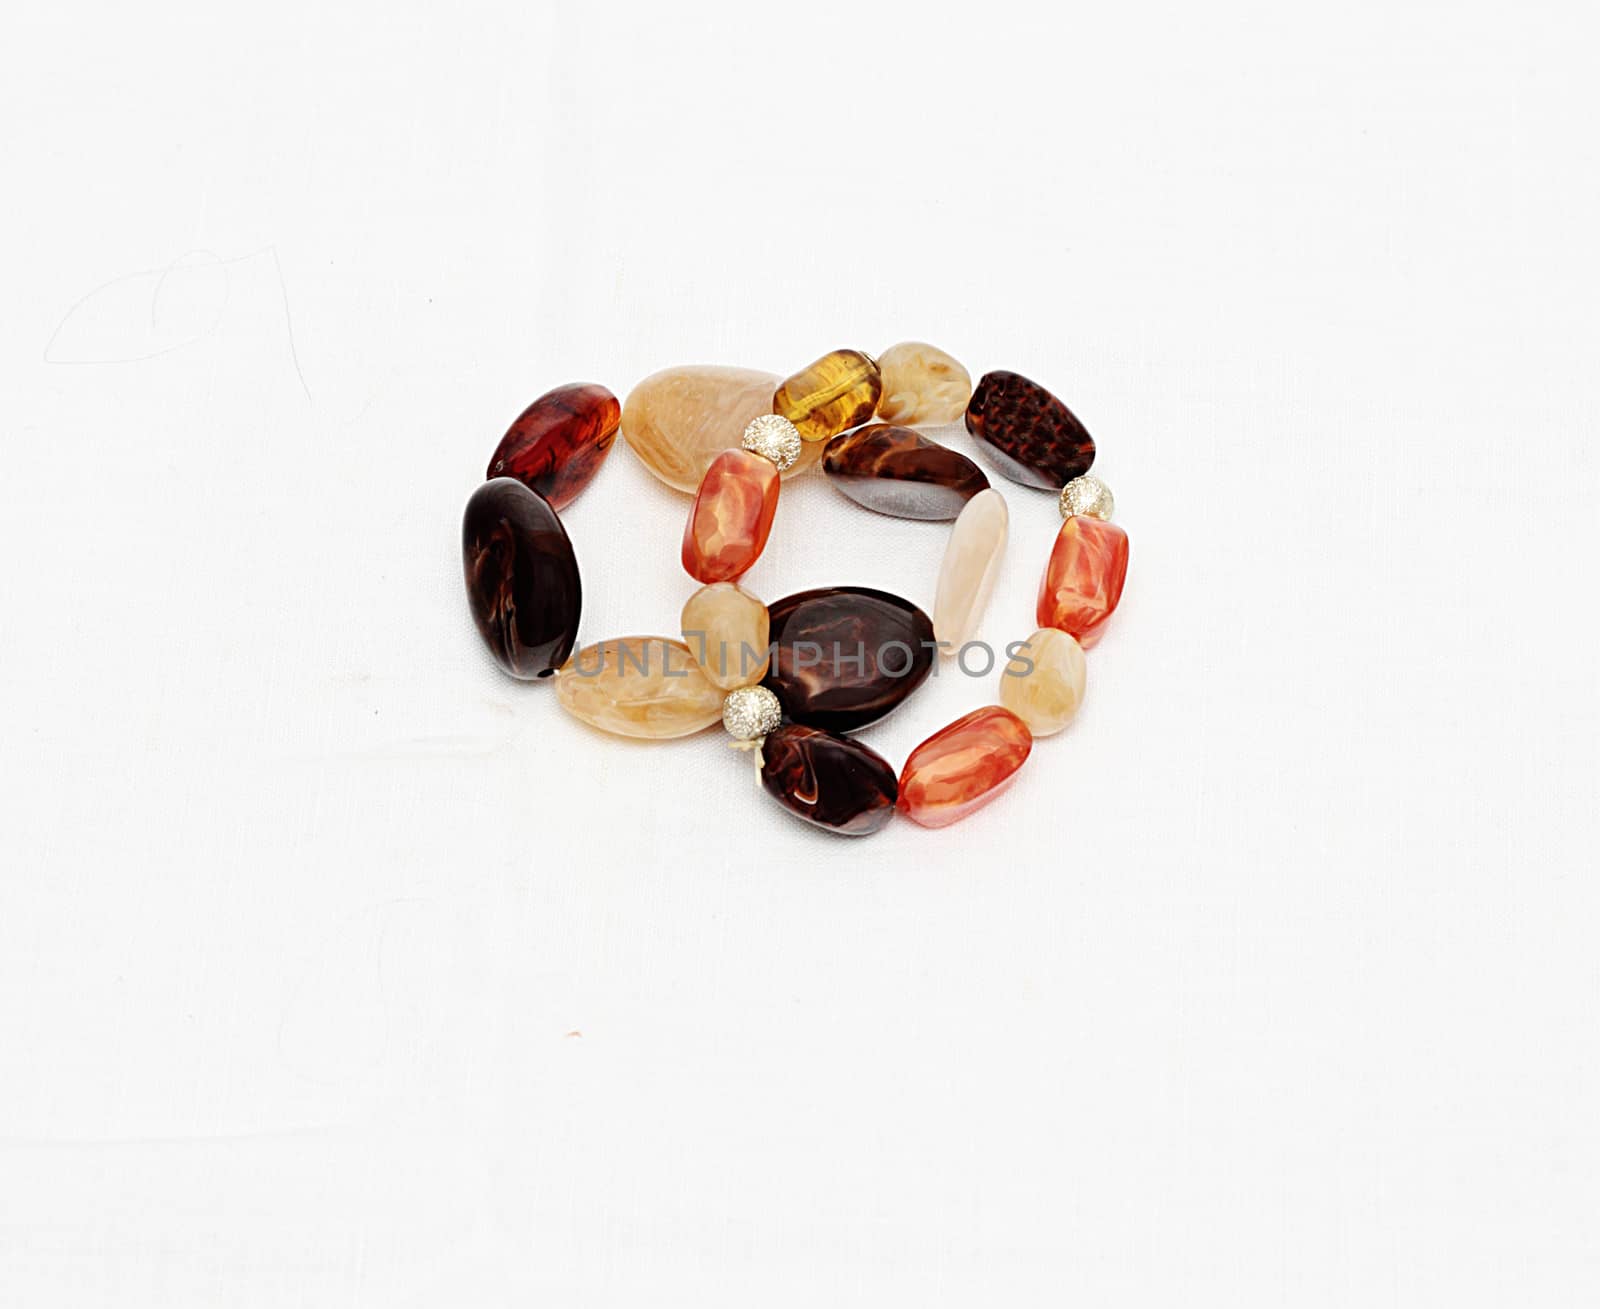 Two bracelets from semi-precious stones. by andsst